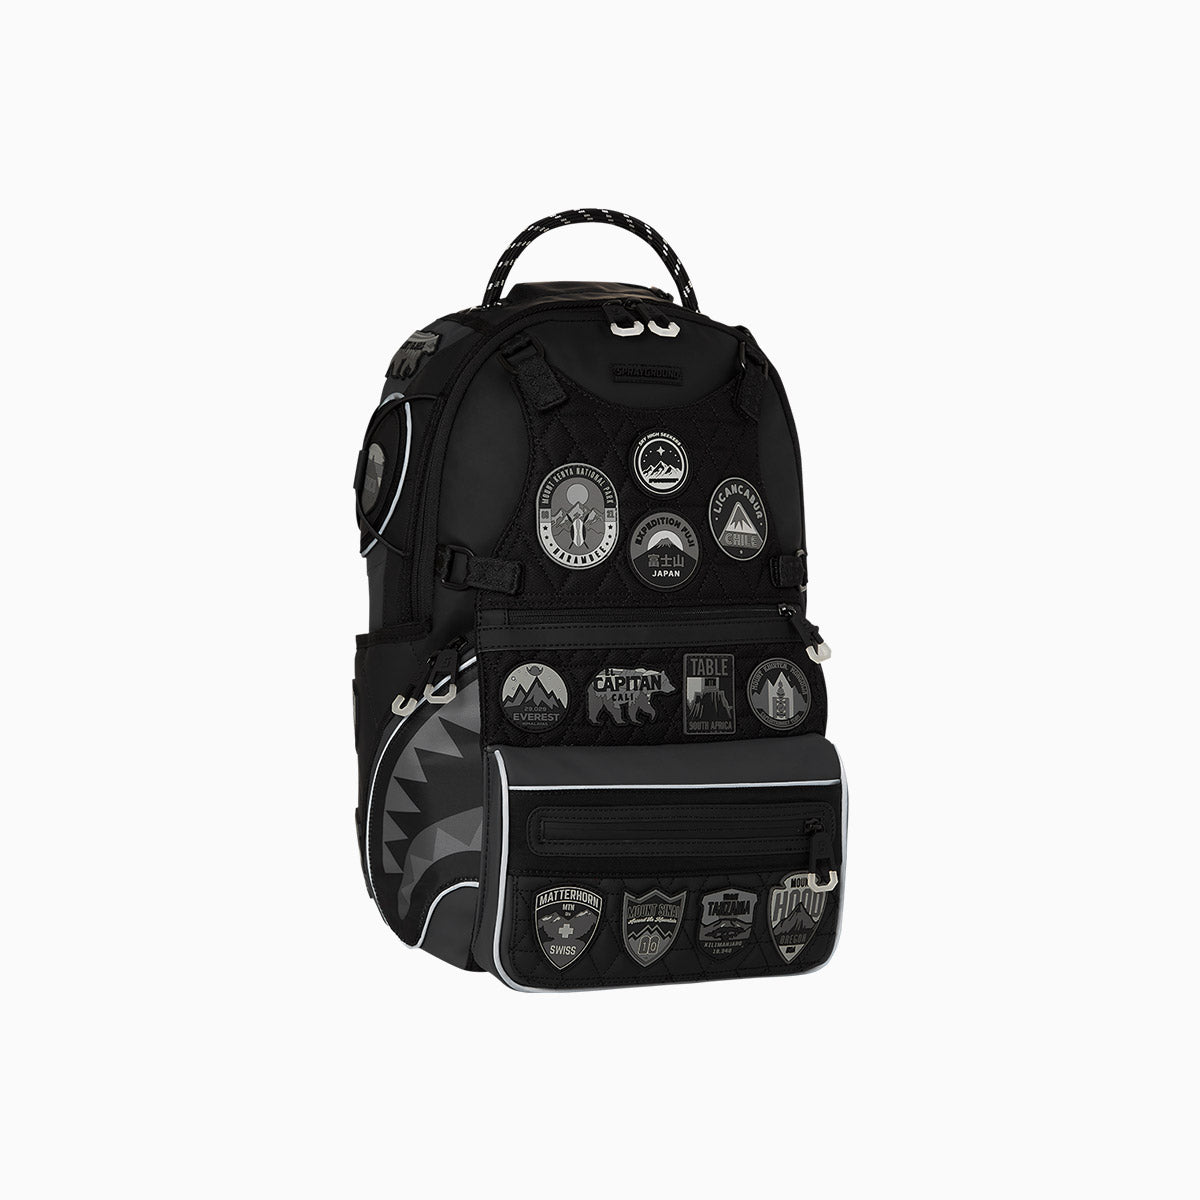 spray-ground-the-global-expedition-nightzone-backpack-b5744-blk